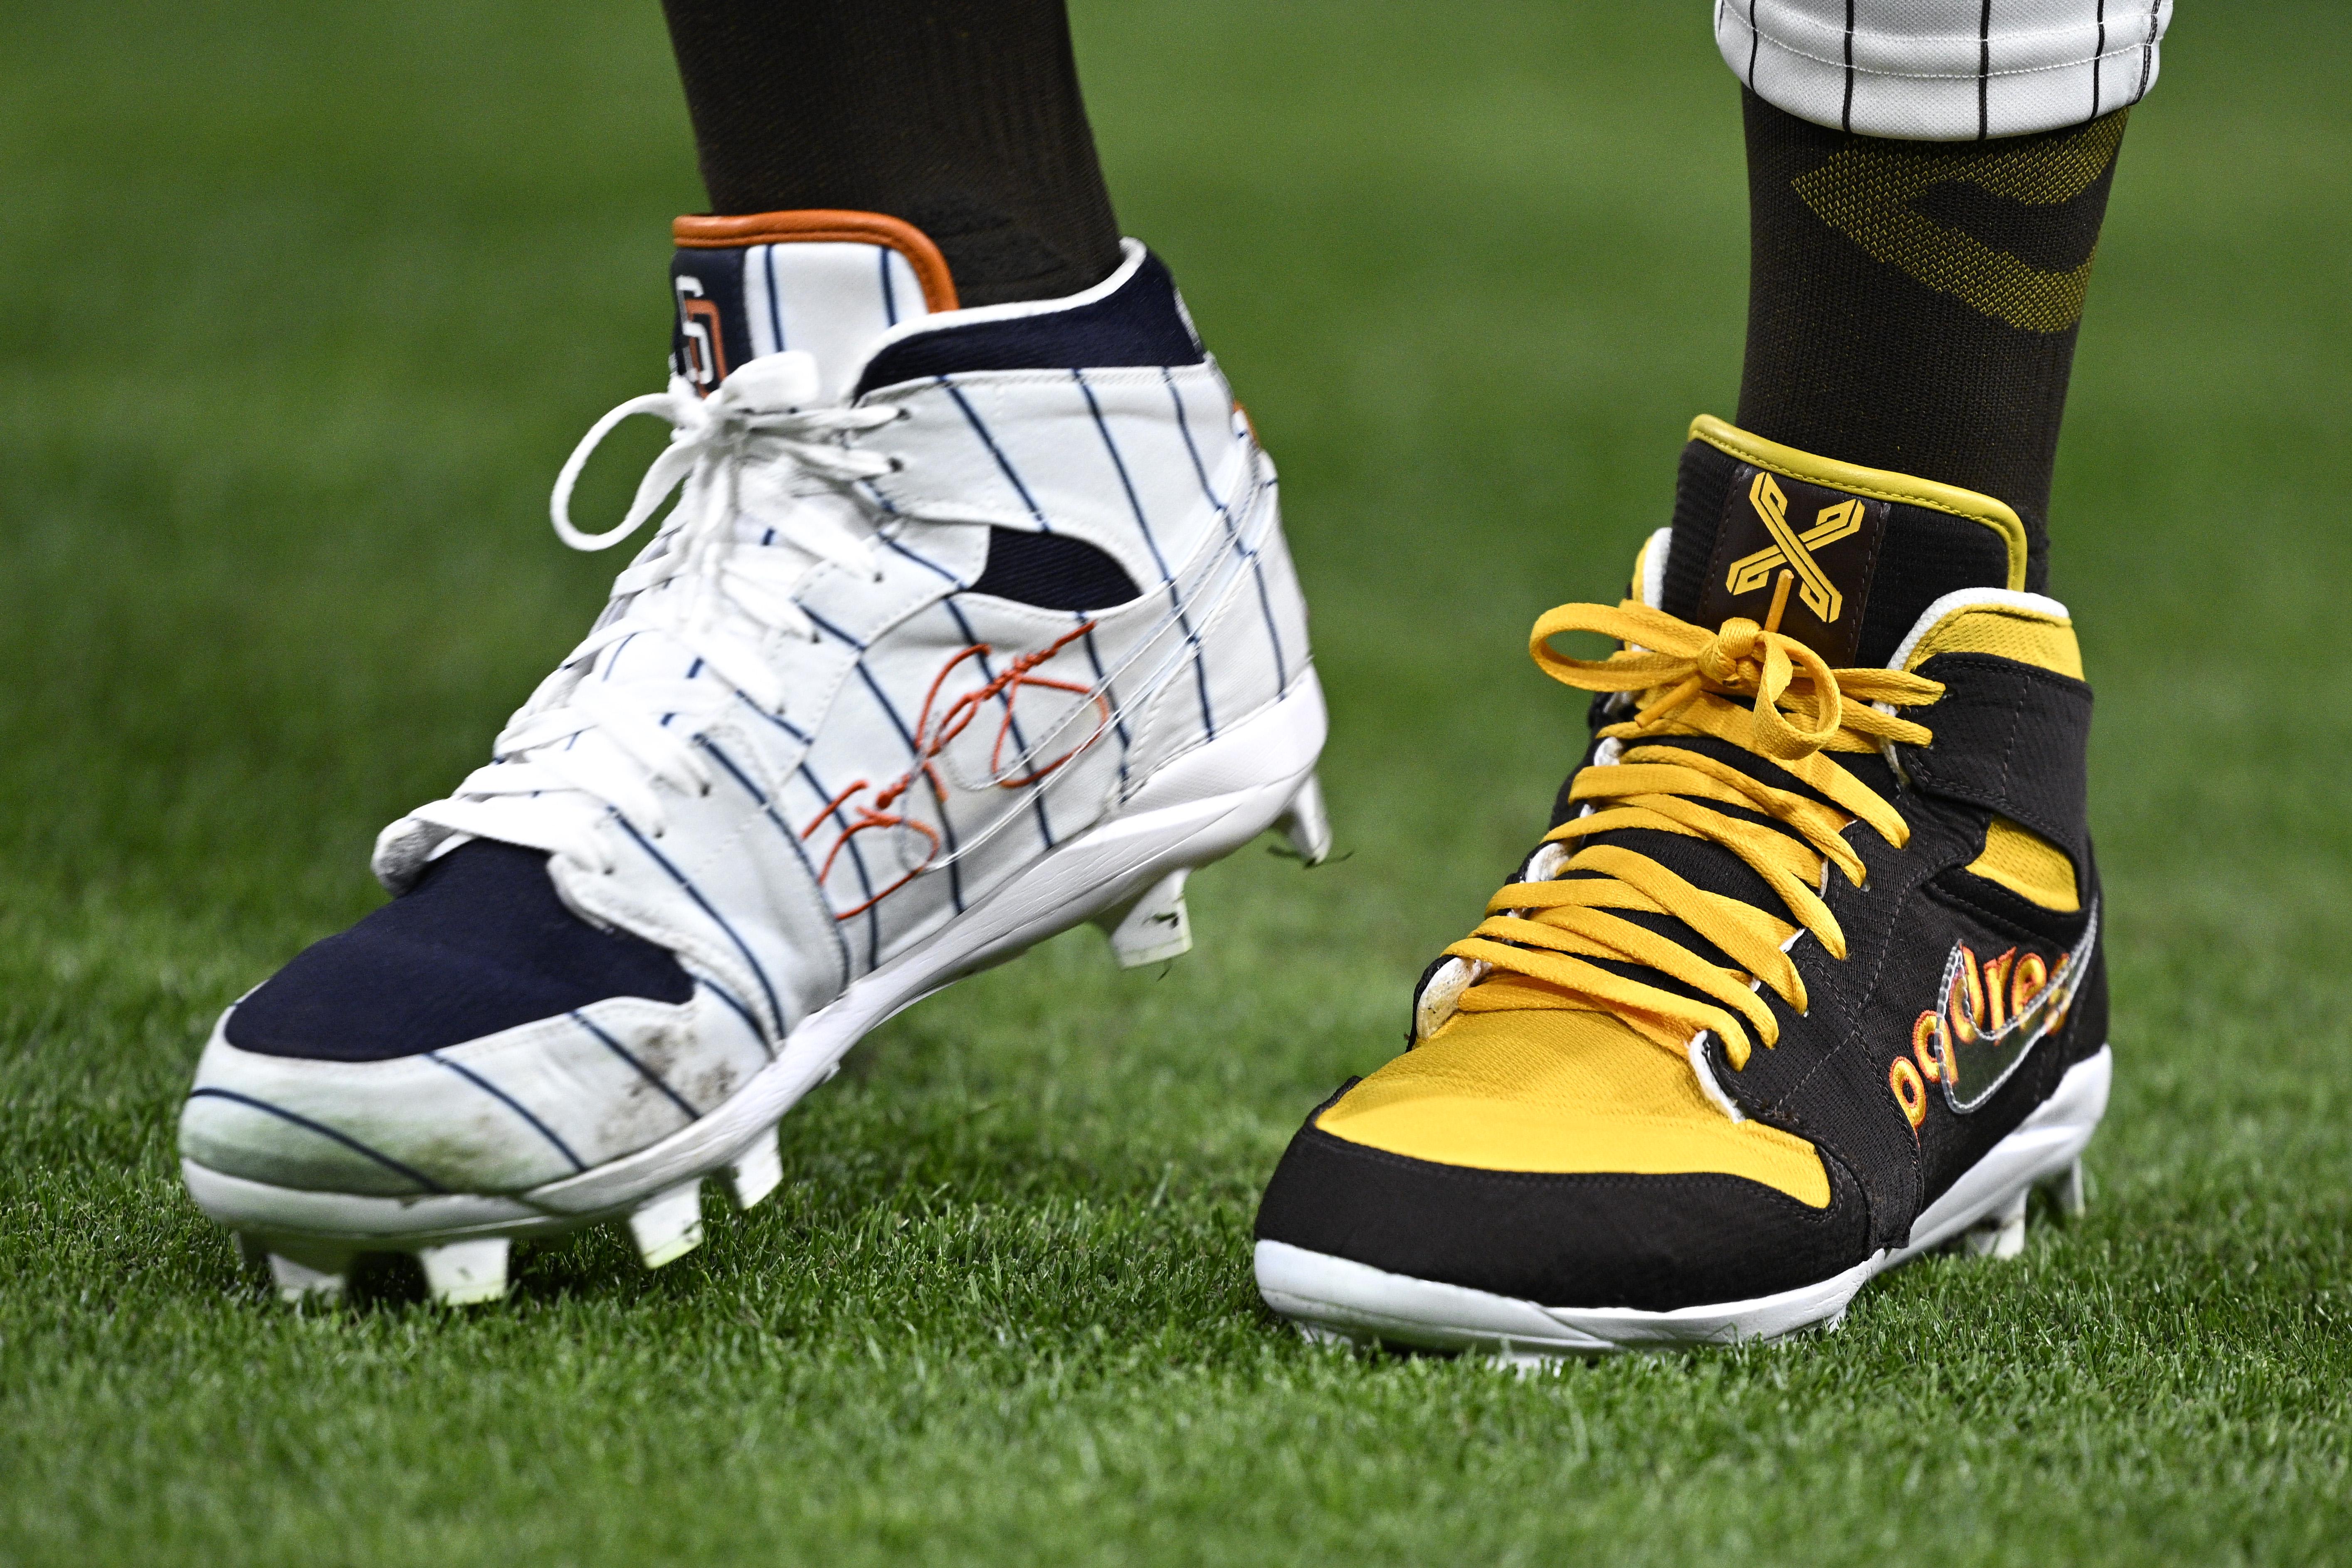 San Diego Padres outfielder Fernando Tatis Jr.'s white and brown cleats.